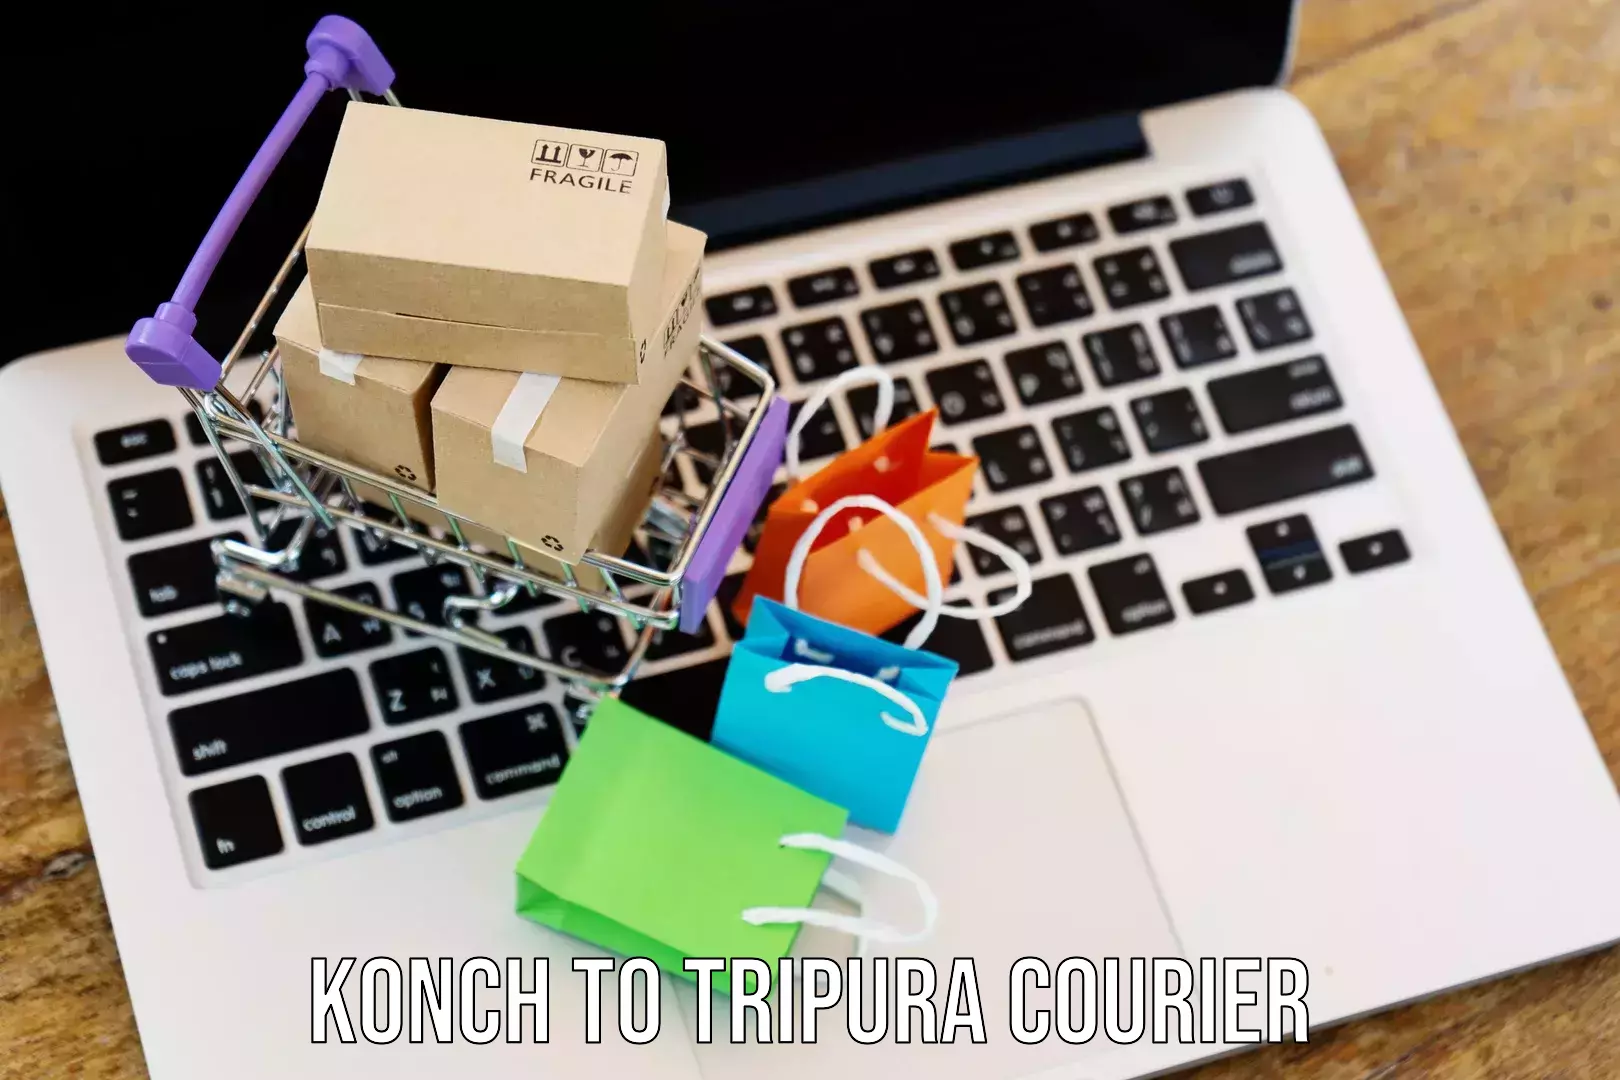 Corporate courier solutions Konch to Tripura